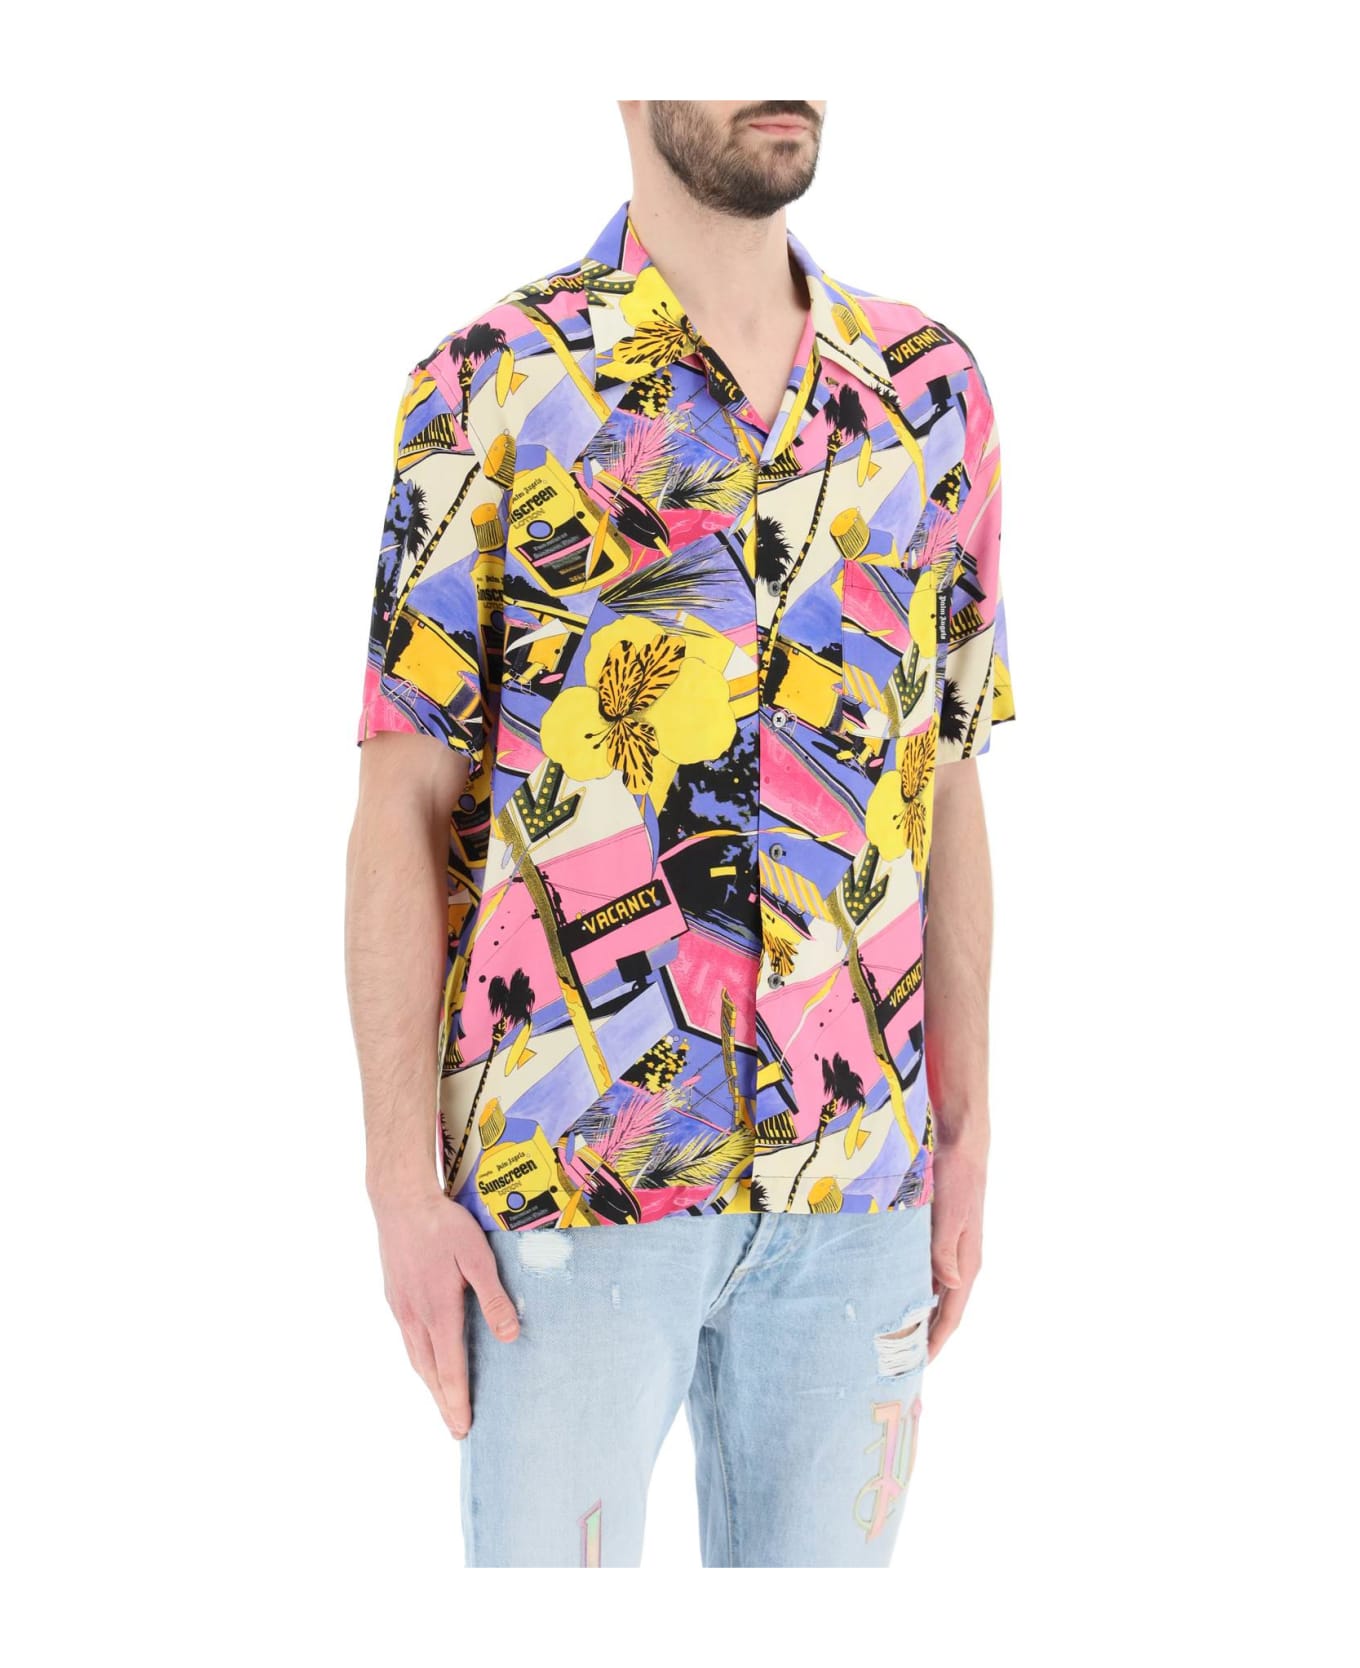 Palm Angels Bowling Style Shirt With Miami Mix Print - MULTICOLORE